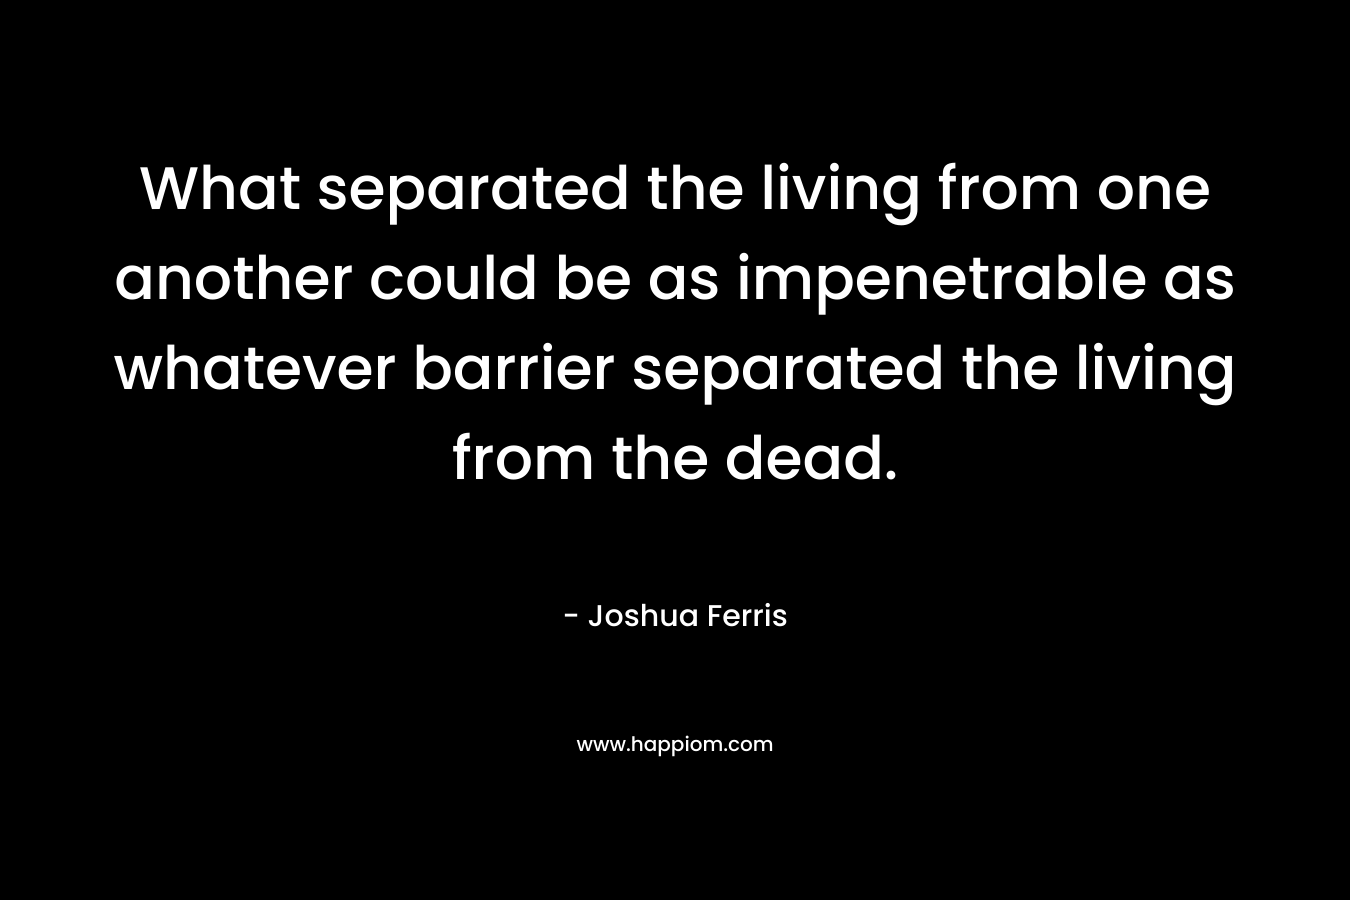 What separated the living from one another could be as impenetrable as whatever barrier separated the living from the dead.